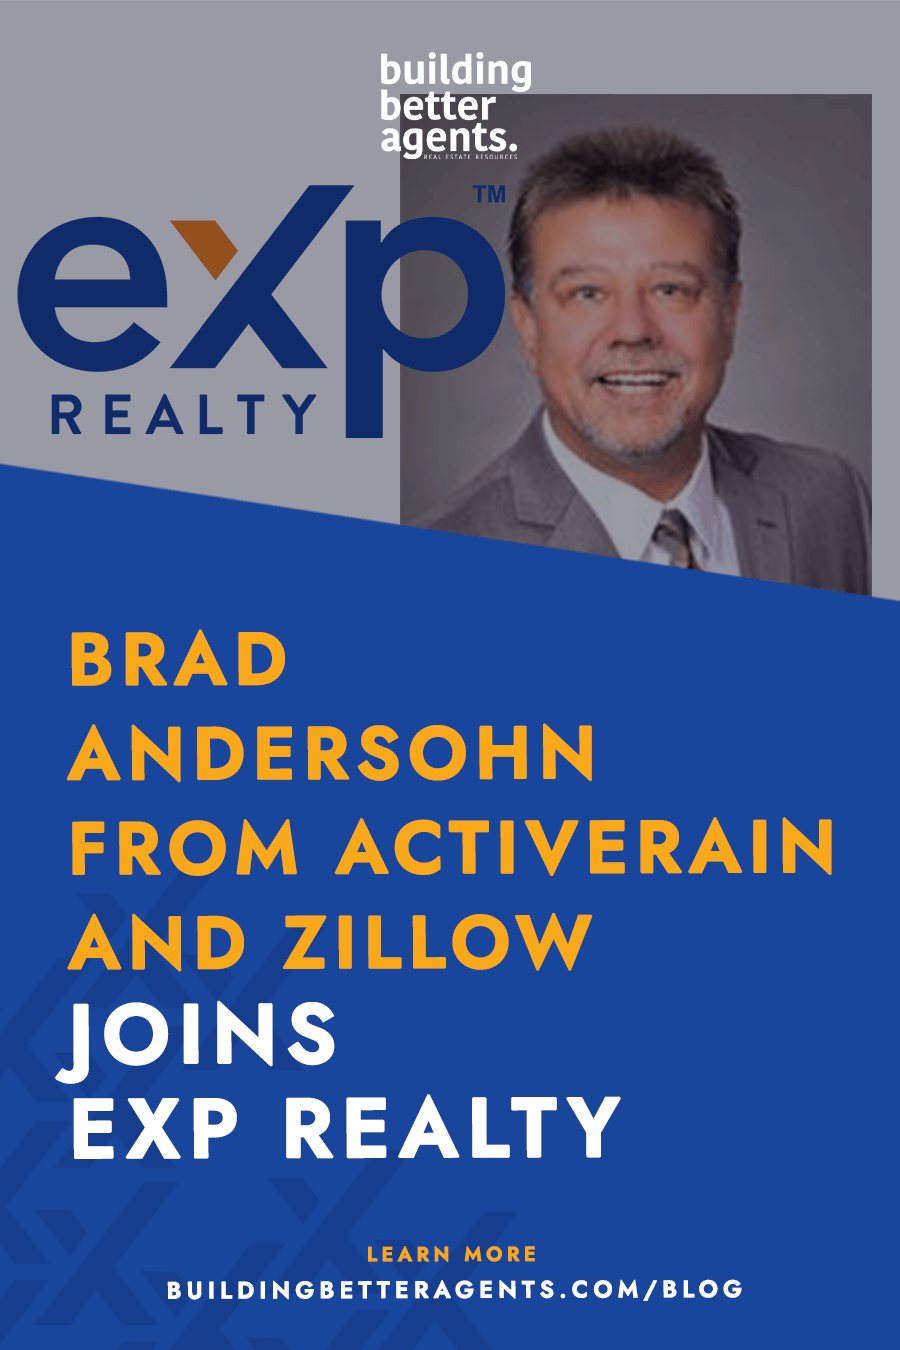 Former Zillow Academy Director Joins The Agent-Owned Cloud Brokerage™ to Launch cloud-based real estate tech campus open to all real estate professionals.